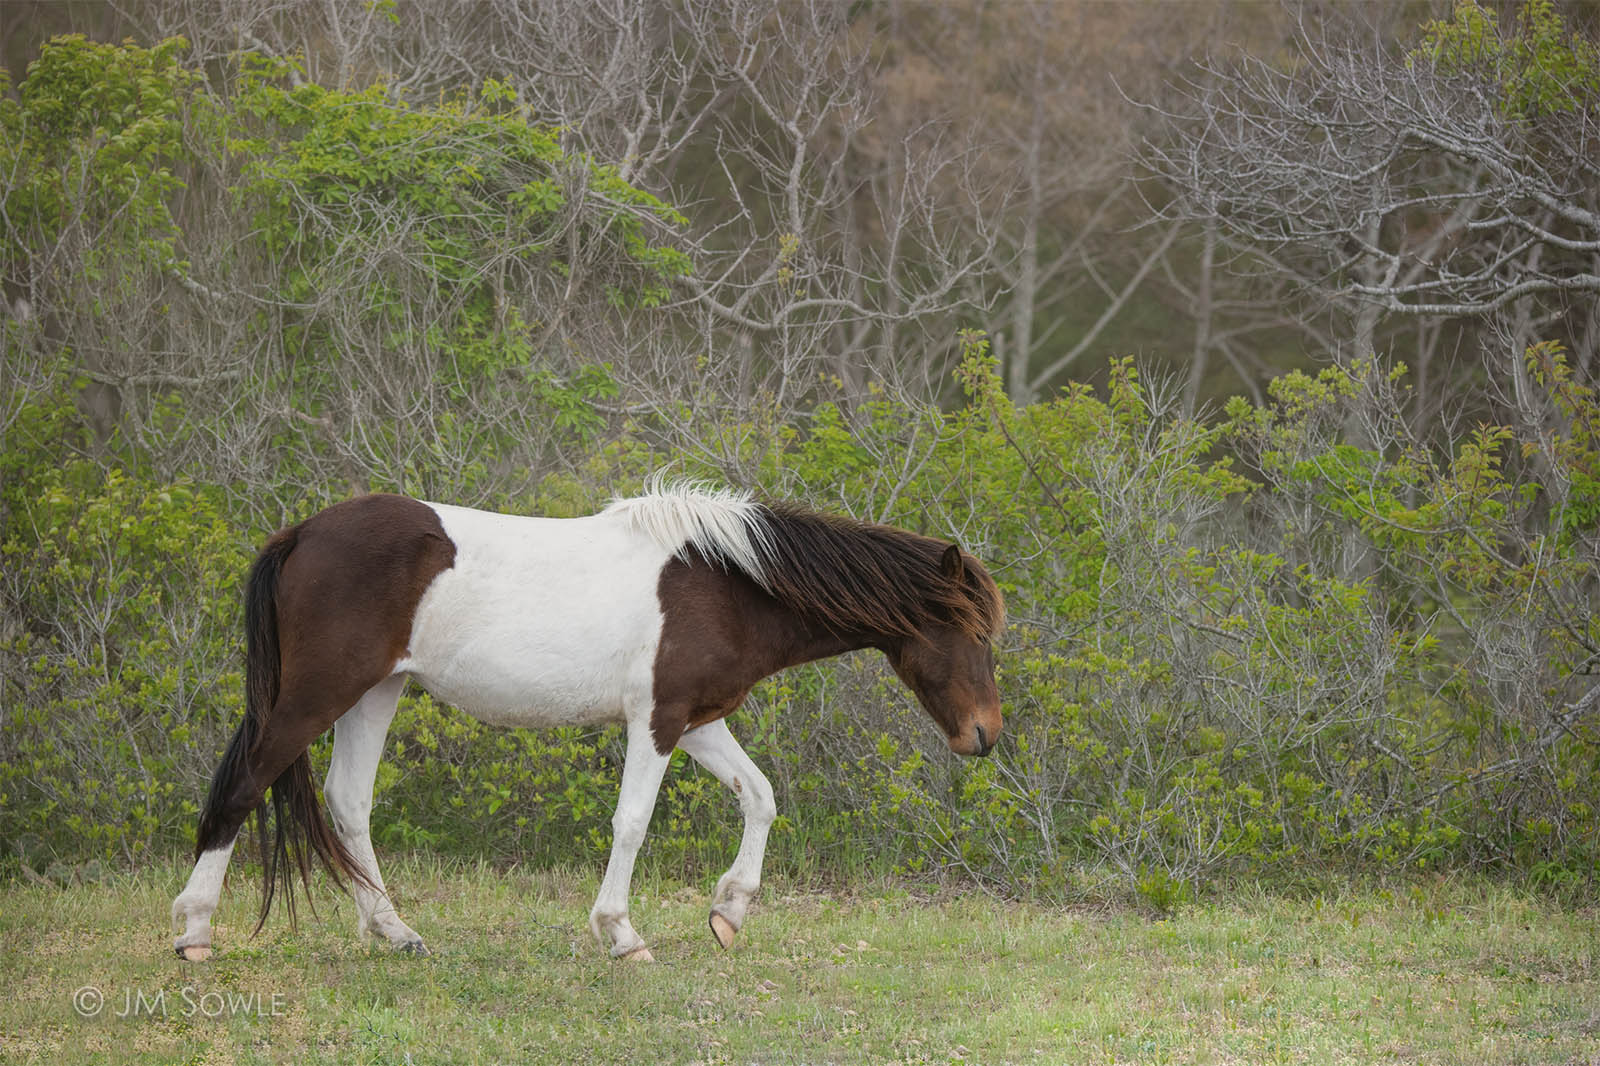 _JMS0067_1600.jpg - Finding horses at Assateague is not a problem.  The challenging part is trying to get a shot of them doing something besides eating.  So here is a horse not eating.